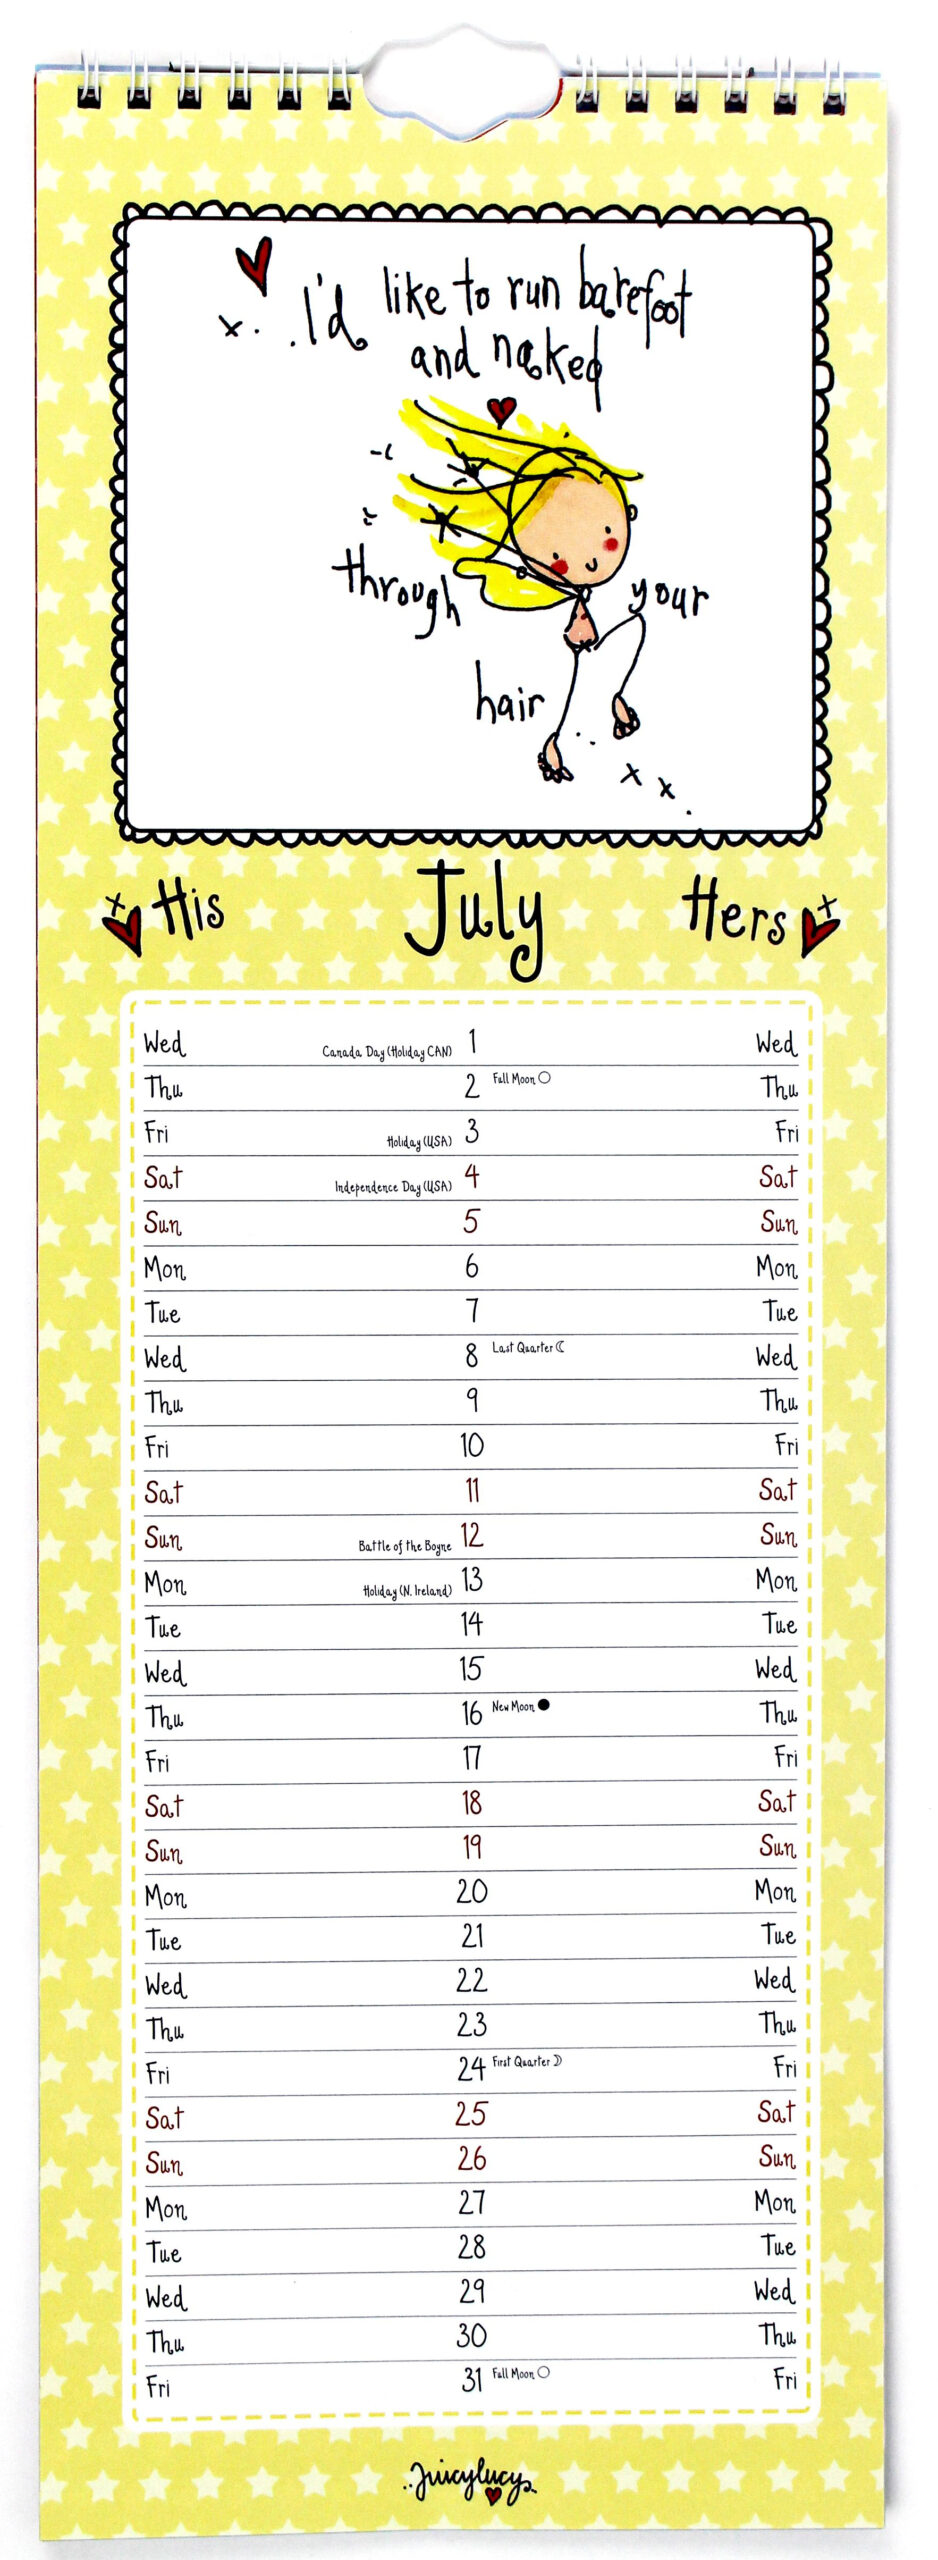 Pick Calendar With Space For Writing